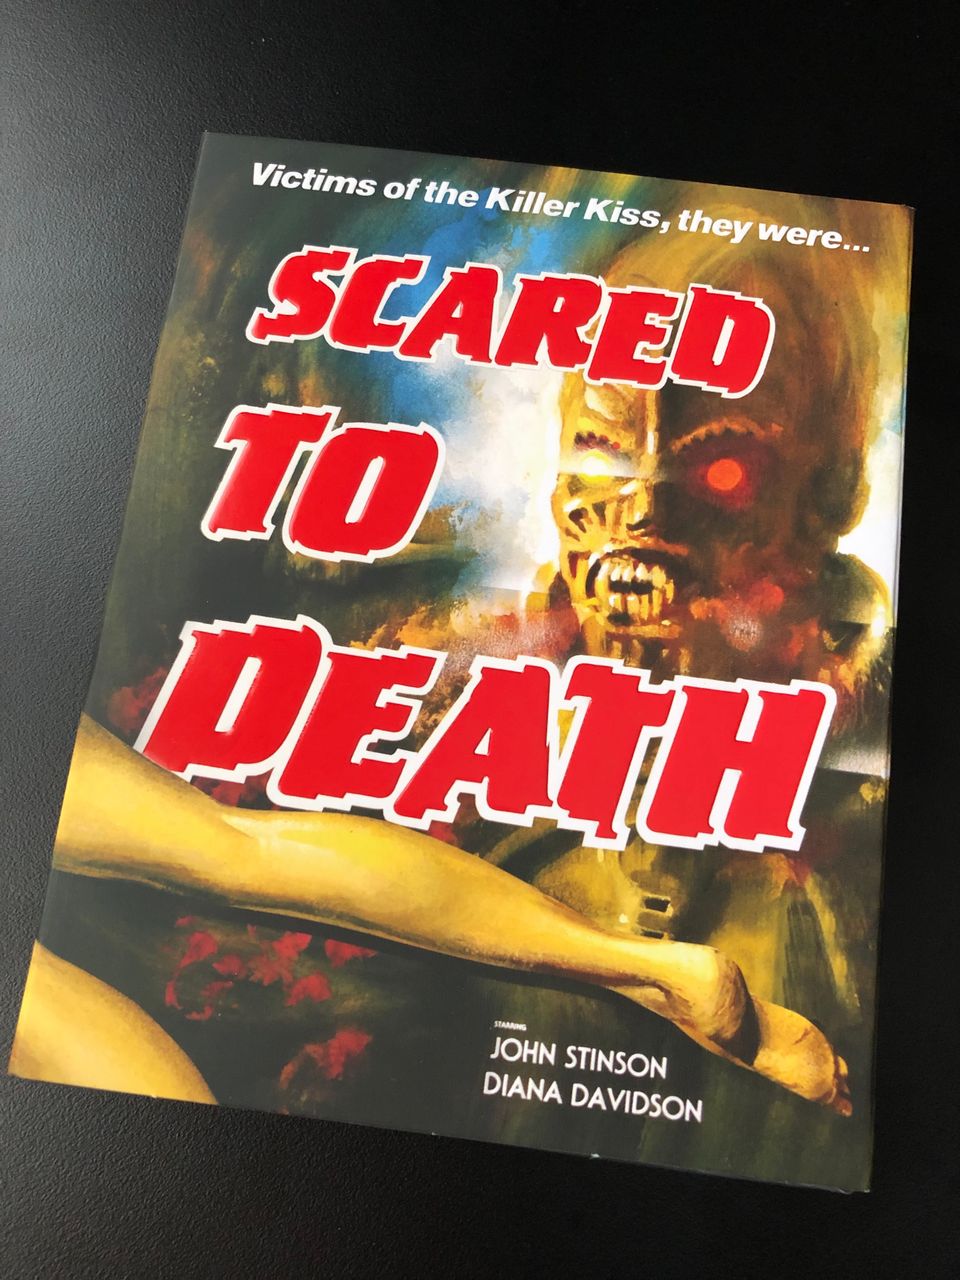 Scared to Death blu-ray (Limited Edition) / Vinegar Syndrome